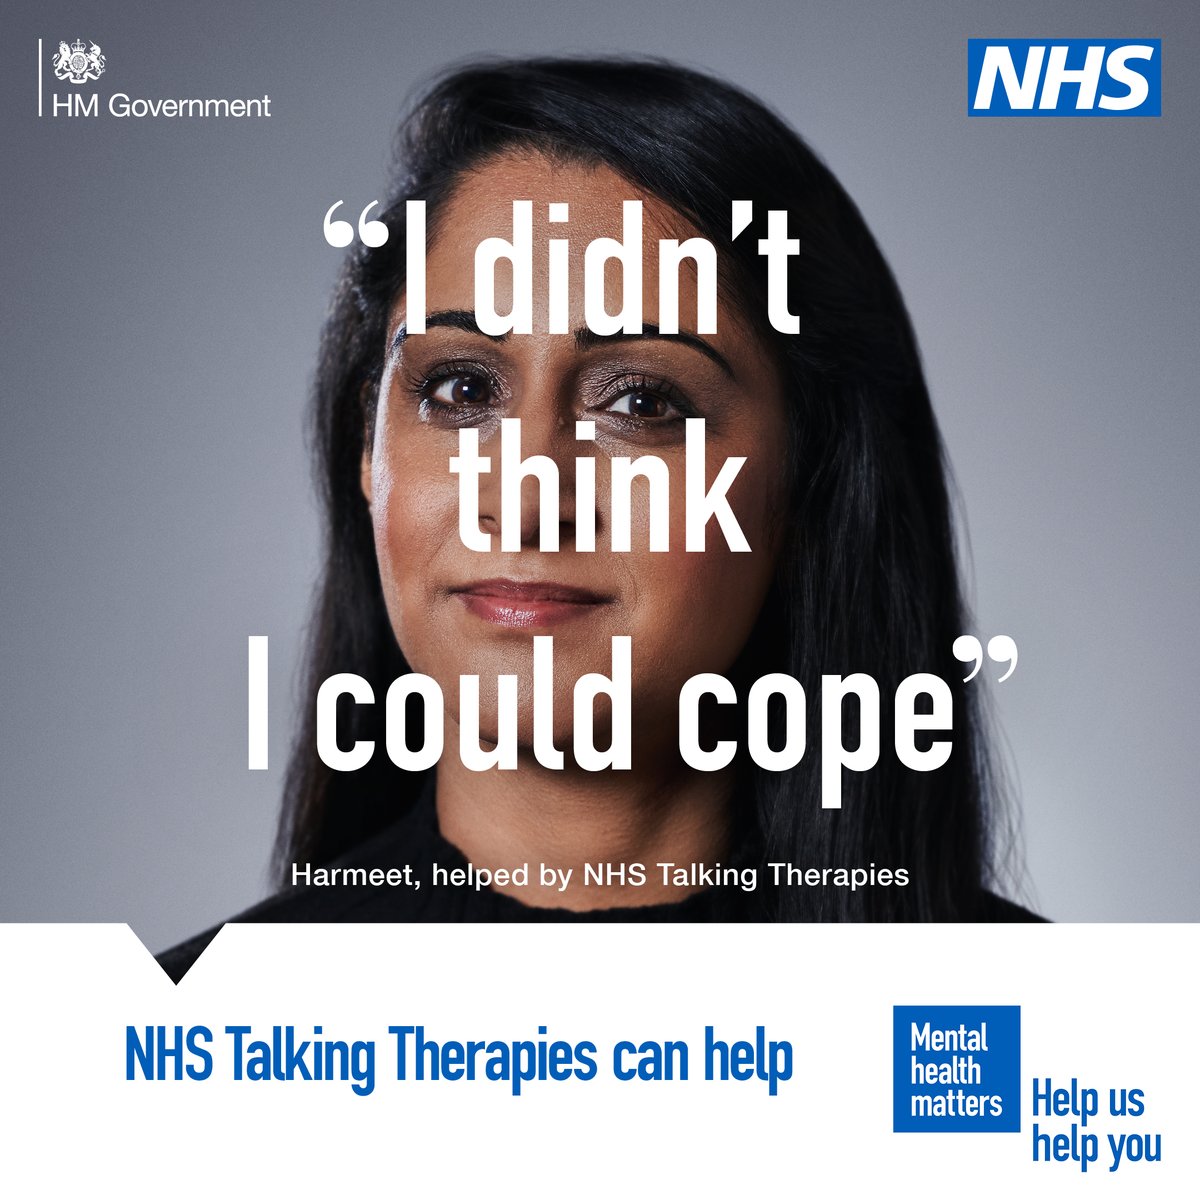 This week is #MentalHealthAwarenessWeek Struggling with feelings of depression, excessive worry, social anxiety, post-traumatic stress or obsessions and compulsions? NHS Talking Therapies can help. Your GP can refer you or refer yourself at nhs.uk/talk.